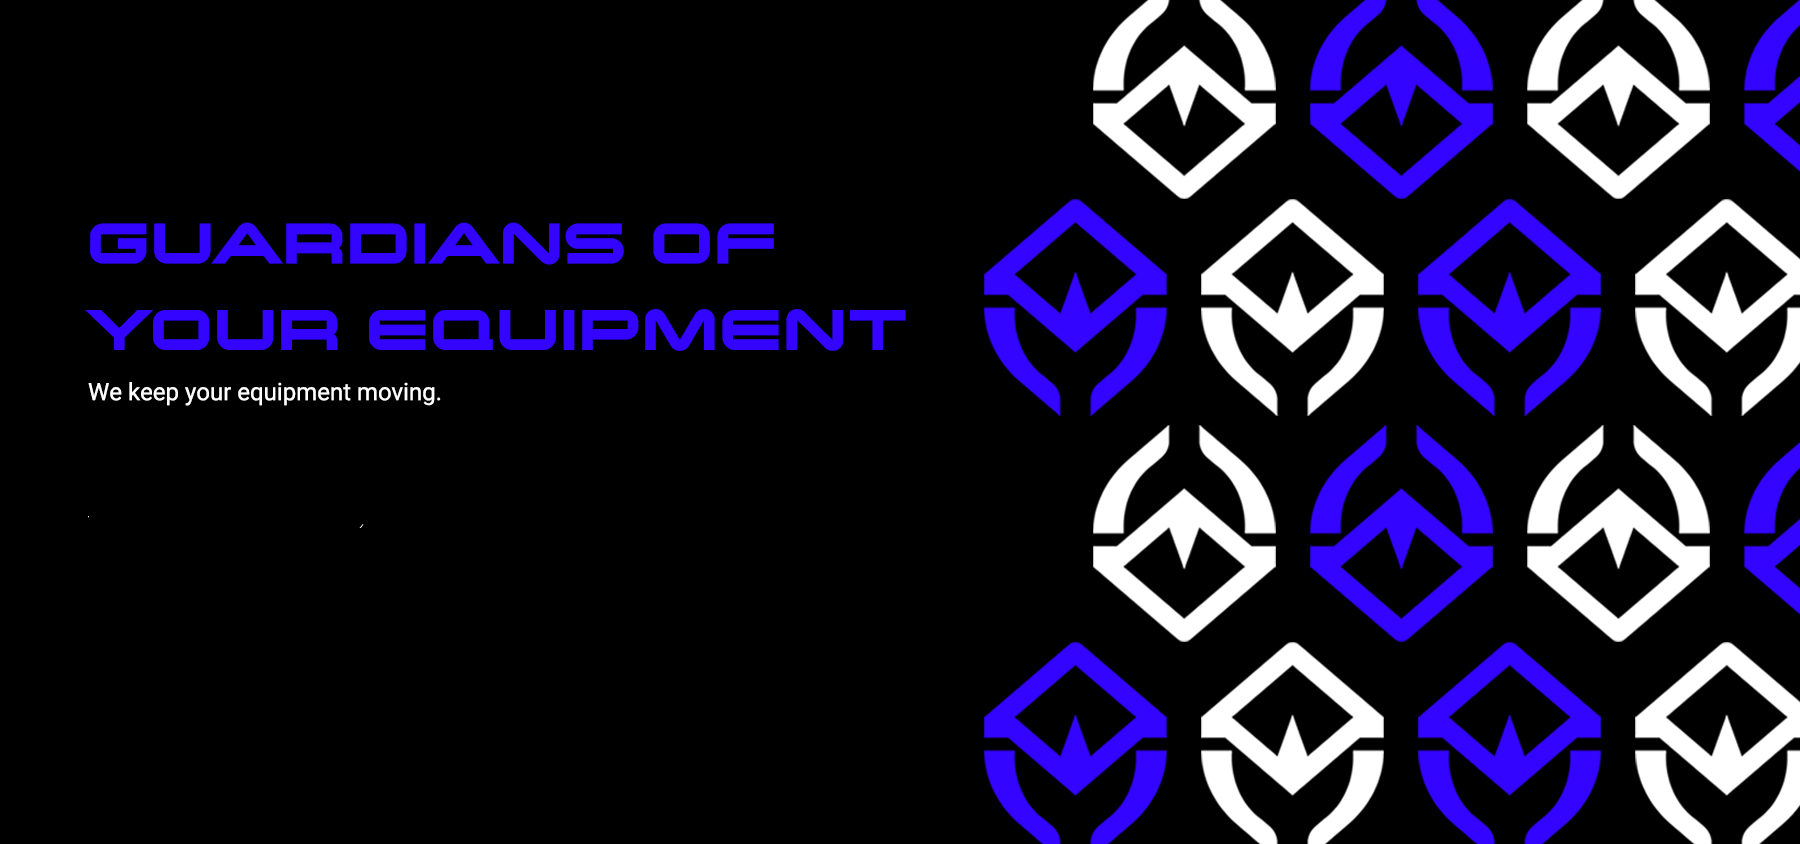 Guardians of your equipment